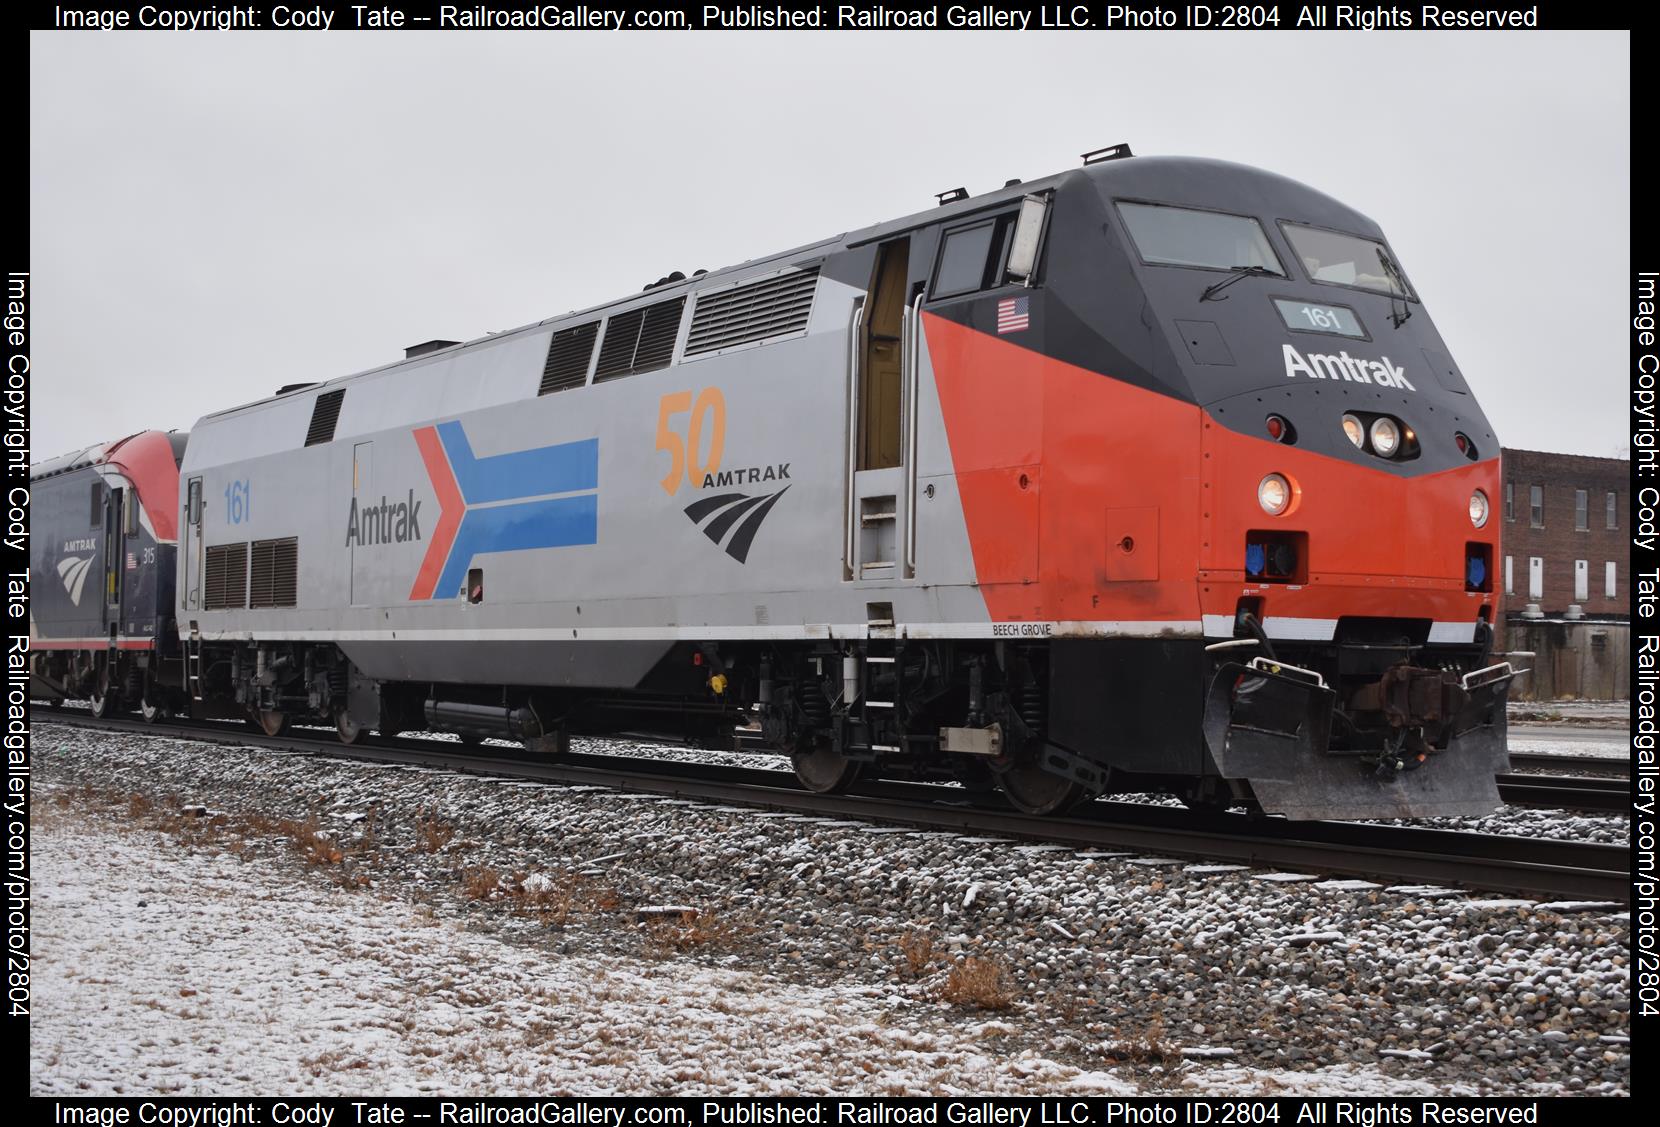 Amtrak 161 is a class P42DC and  is pictured in Centralia, Illinois, USA.  This was taken along the Centralia subdivision  on the Amtrak. Photo Copyright: Cody  Tate uploaded to Railroad Gallery on 12/28/2023. This photograph of Amtrak 161 was taken on Thursday, December 28, 2023. All Rights Reserved. 